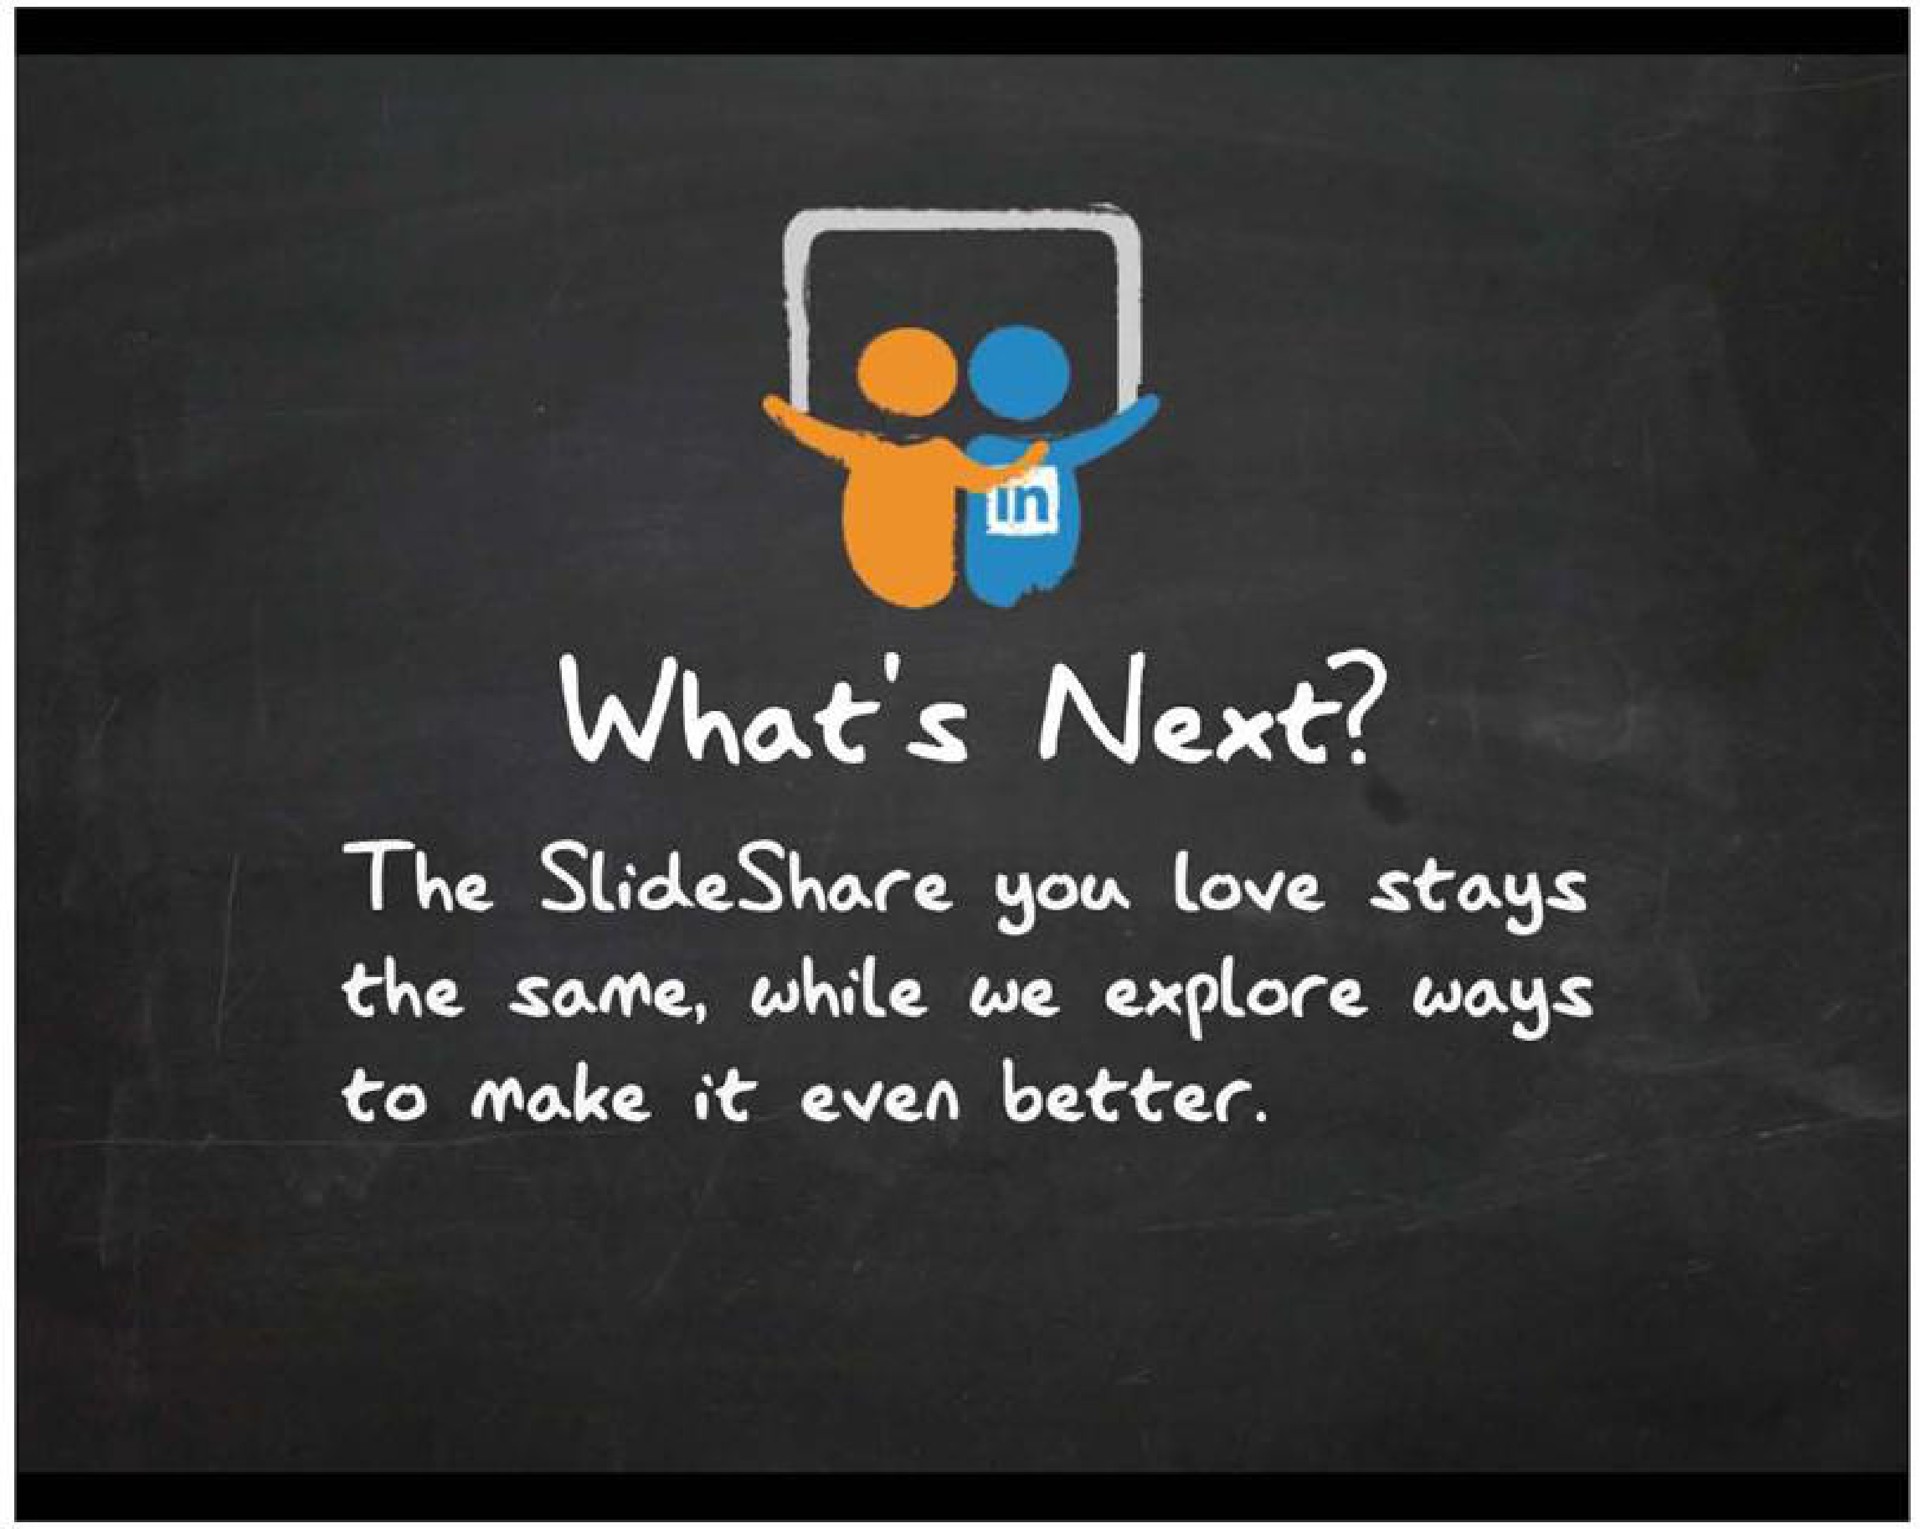 whats next the same while we explore ways to make it even better | Linkedin